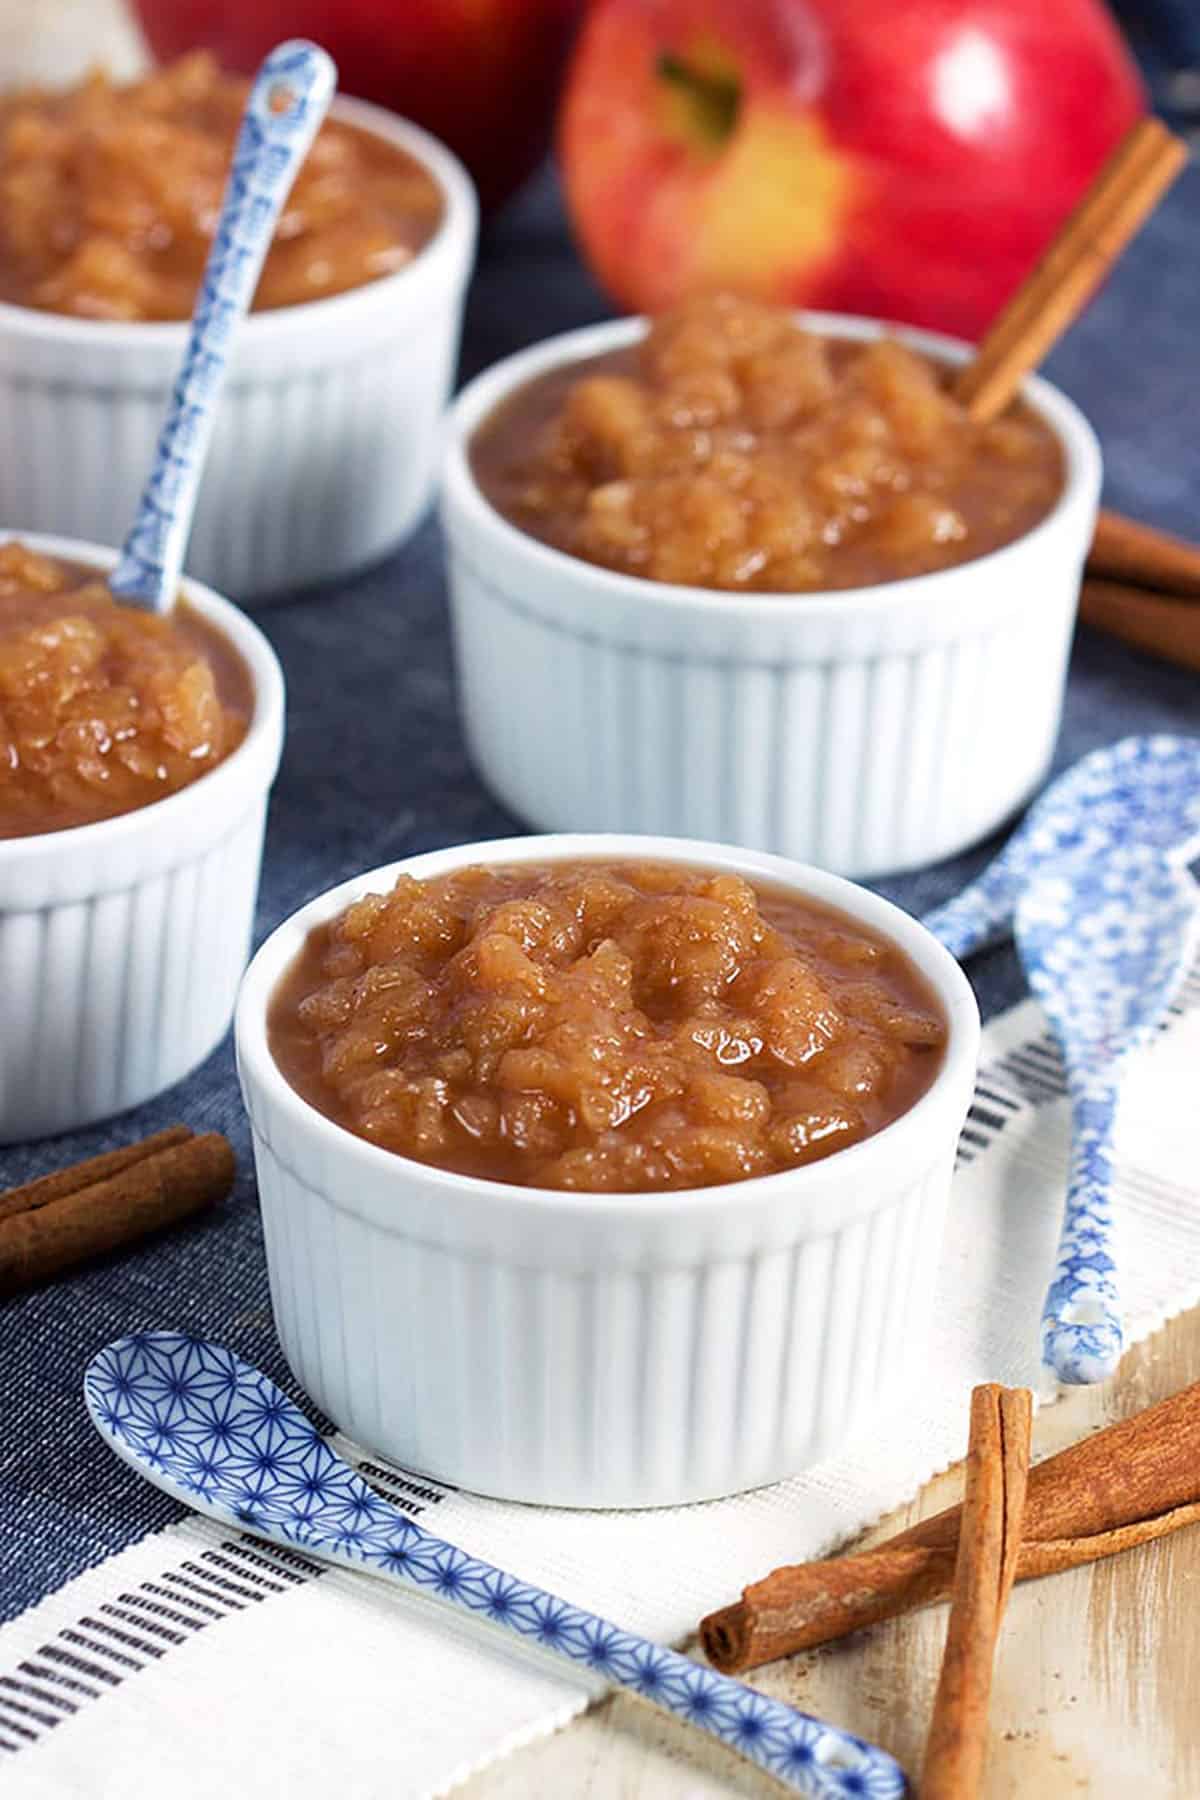 applesauce in a white dish with a blue and white spoon.